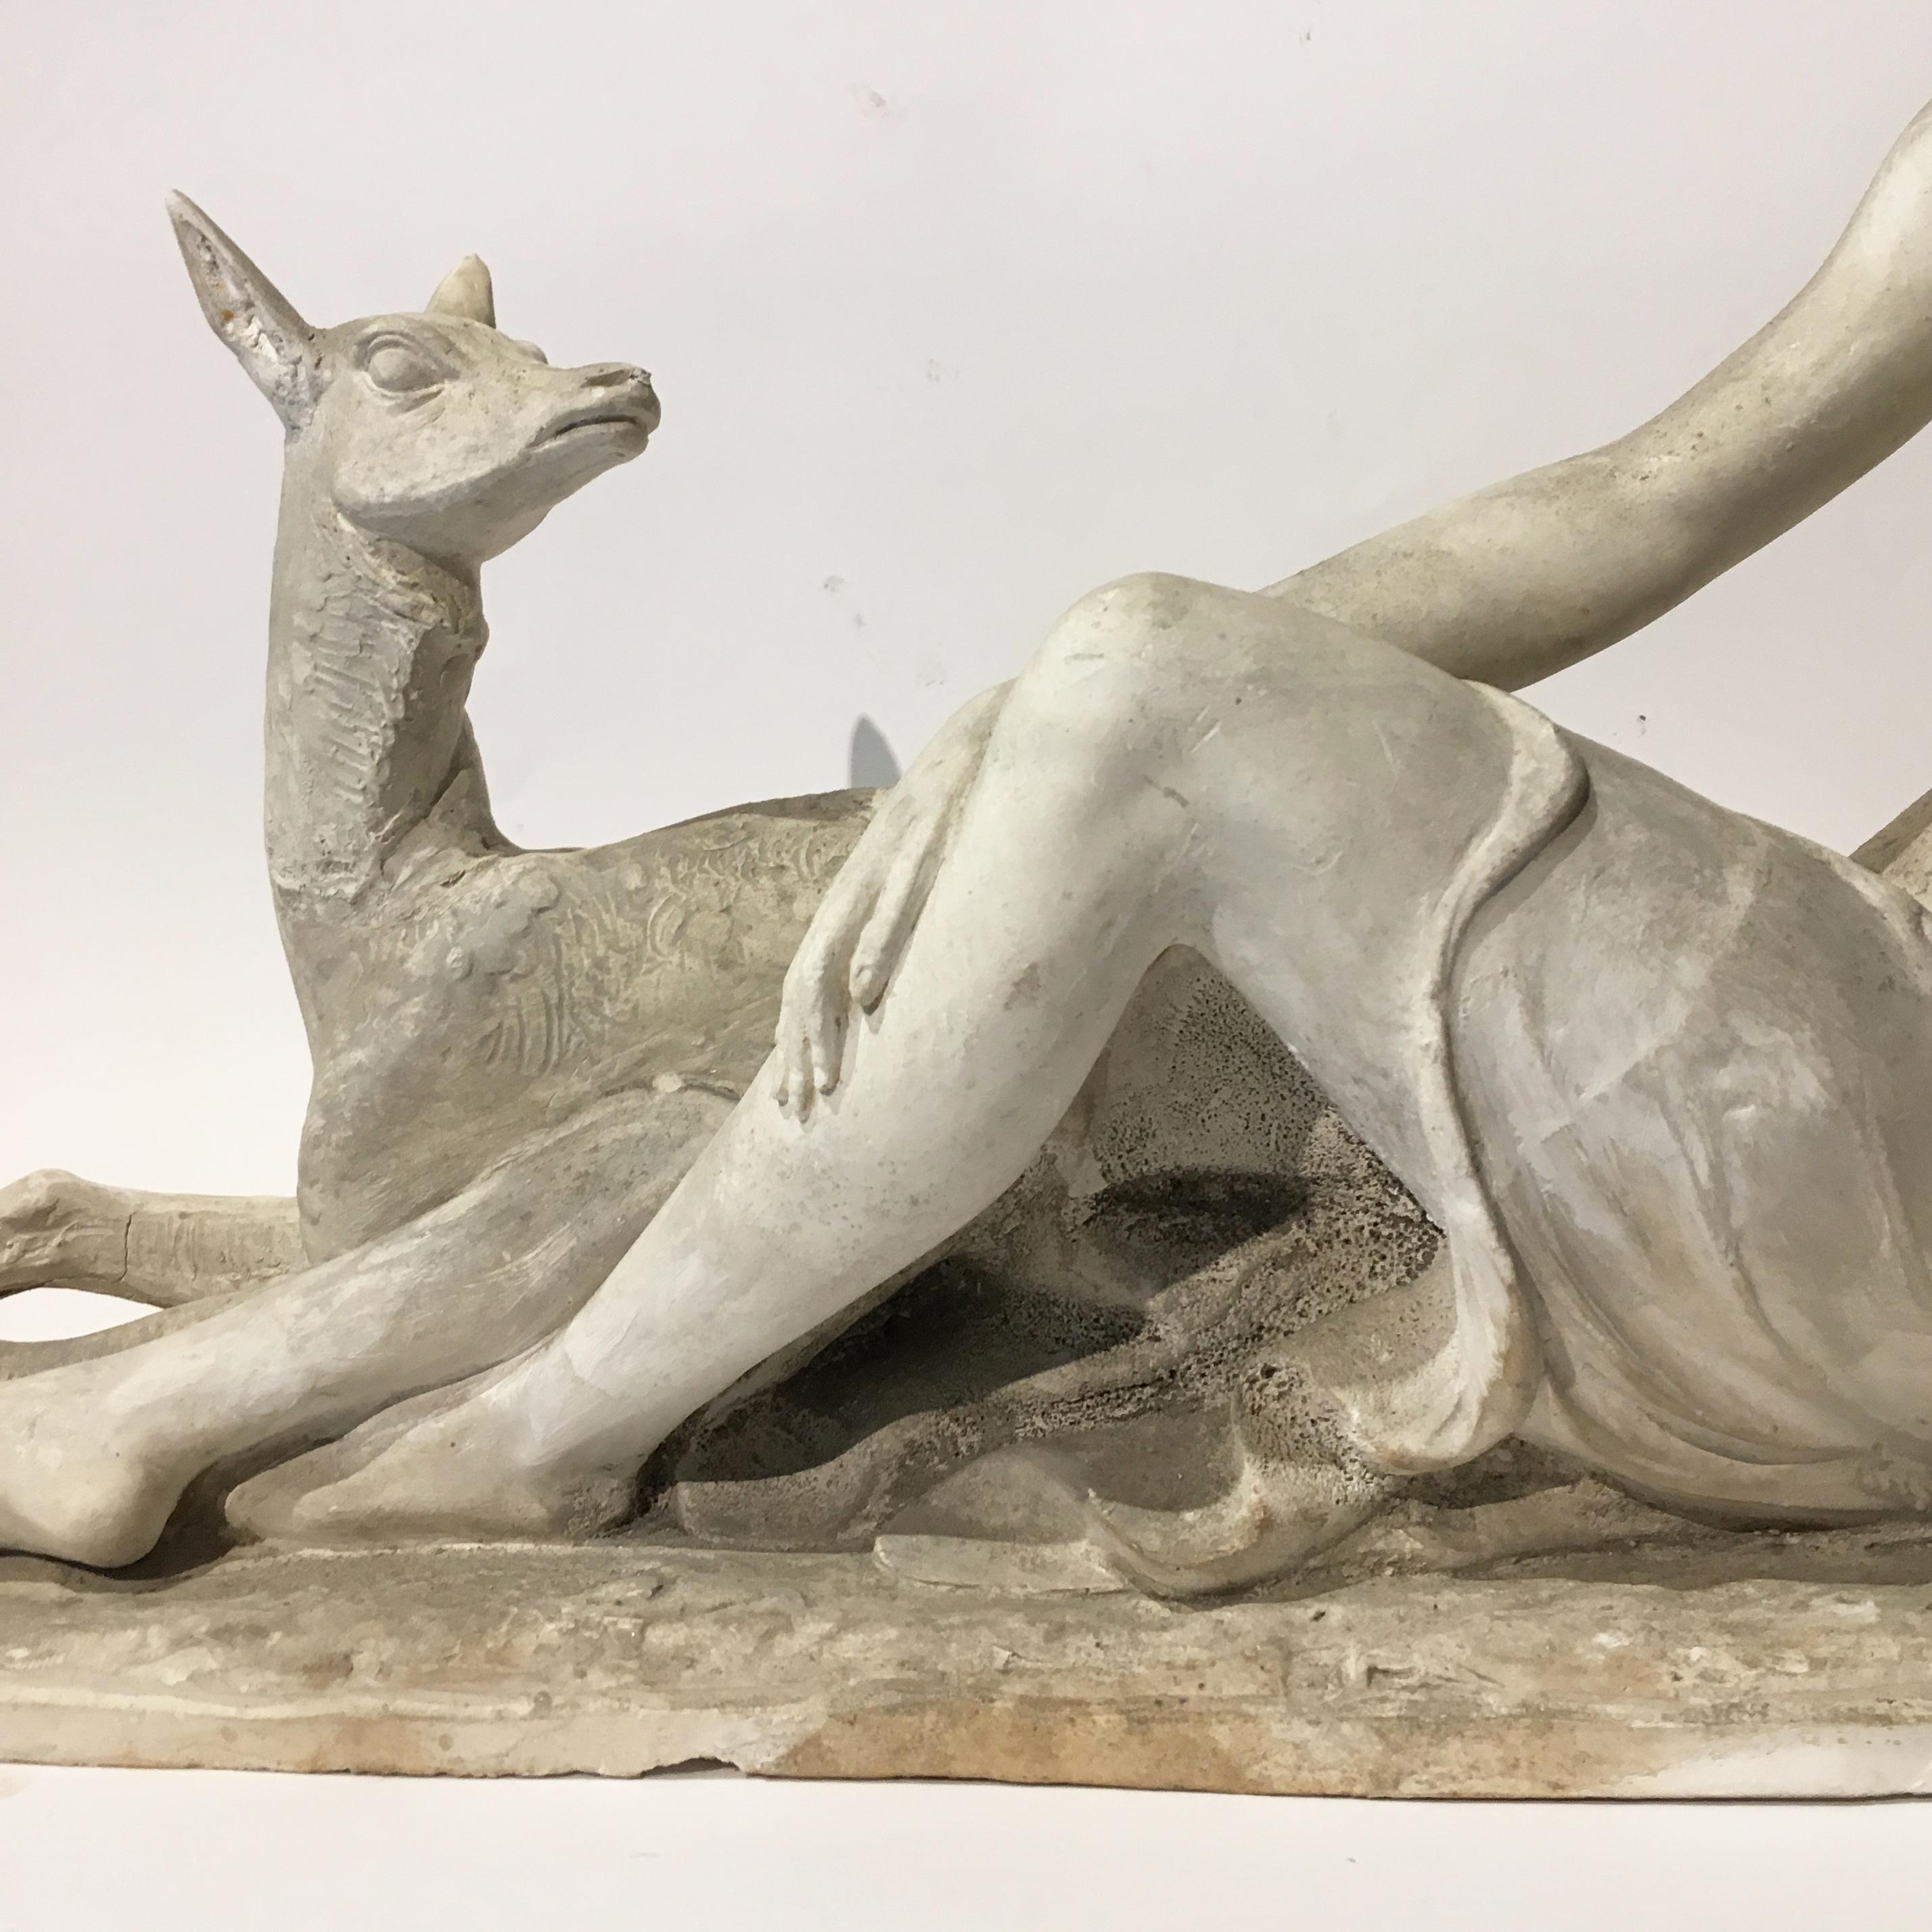 Early 20th Century Italian Art Deco Plaster Sculpture by Mario Bandini For Sale 6